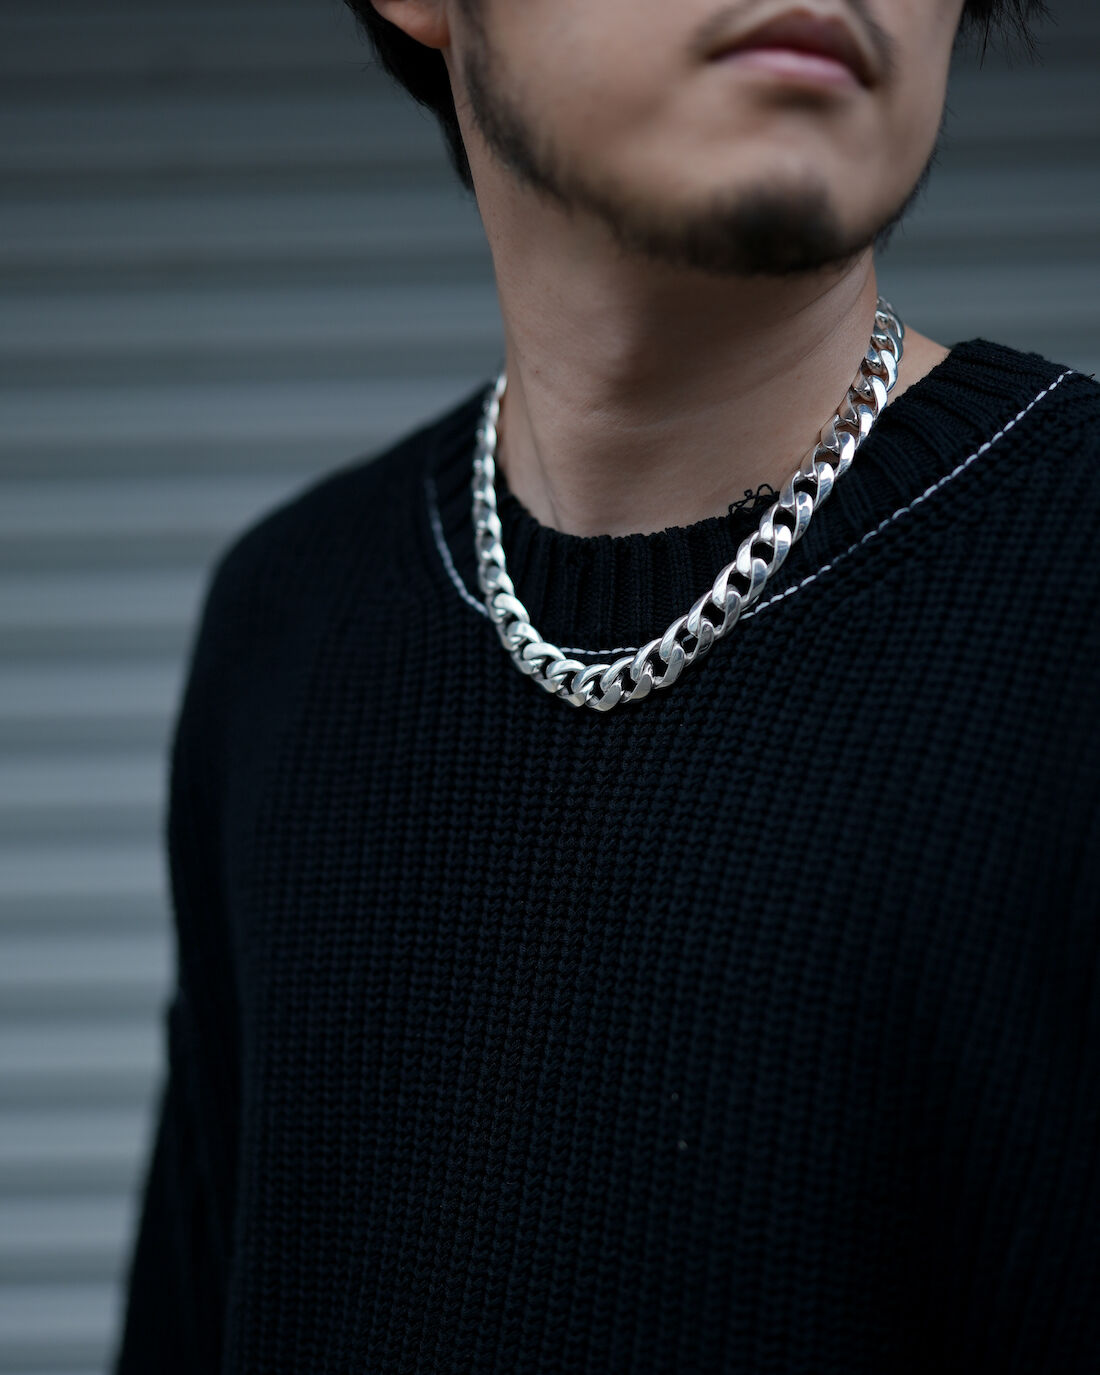 OX JEWELRY フレンチロープチェーンネックレス1度着用のみ　MBアイテム